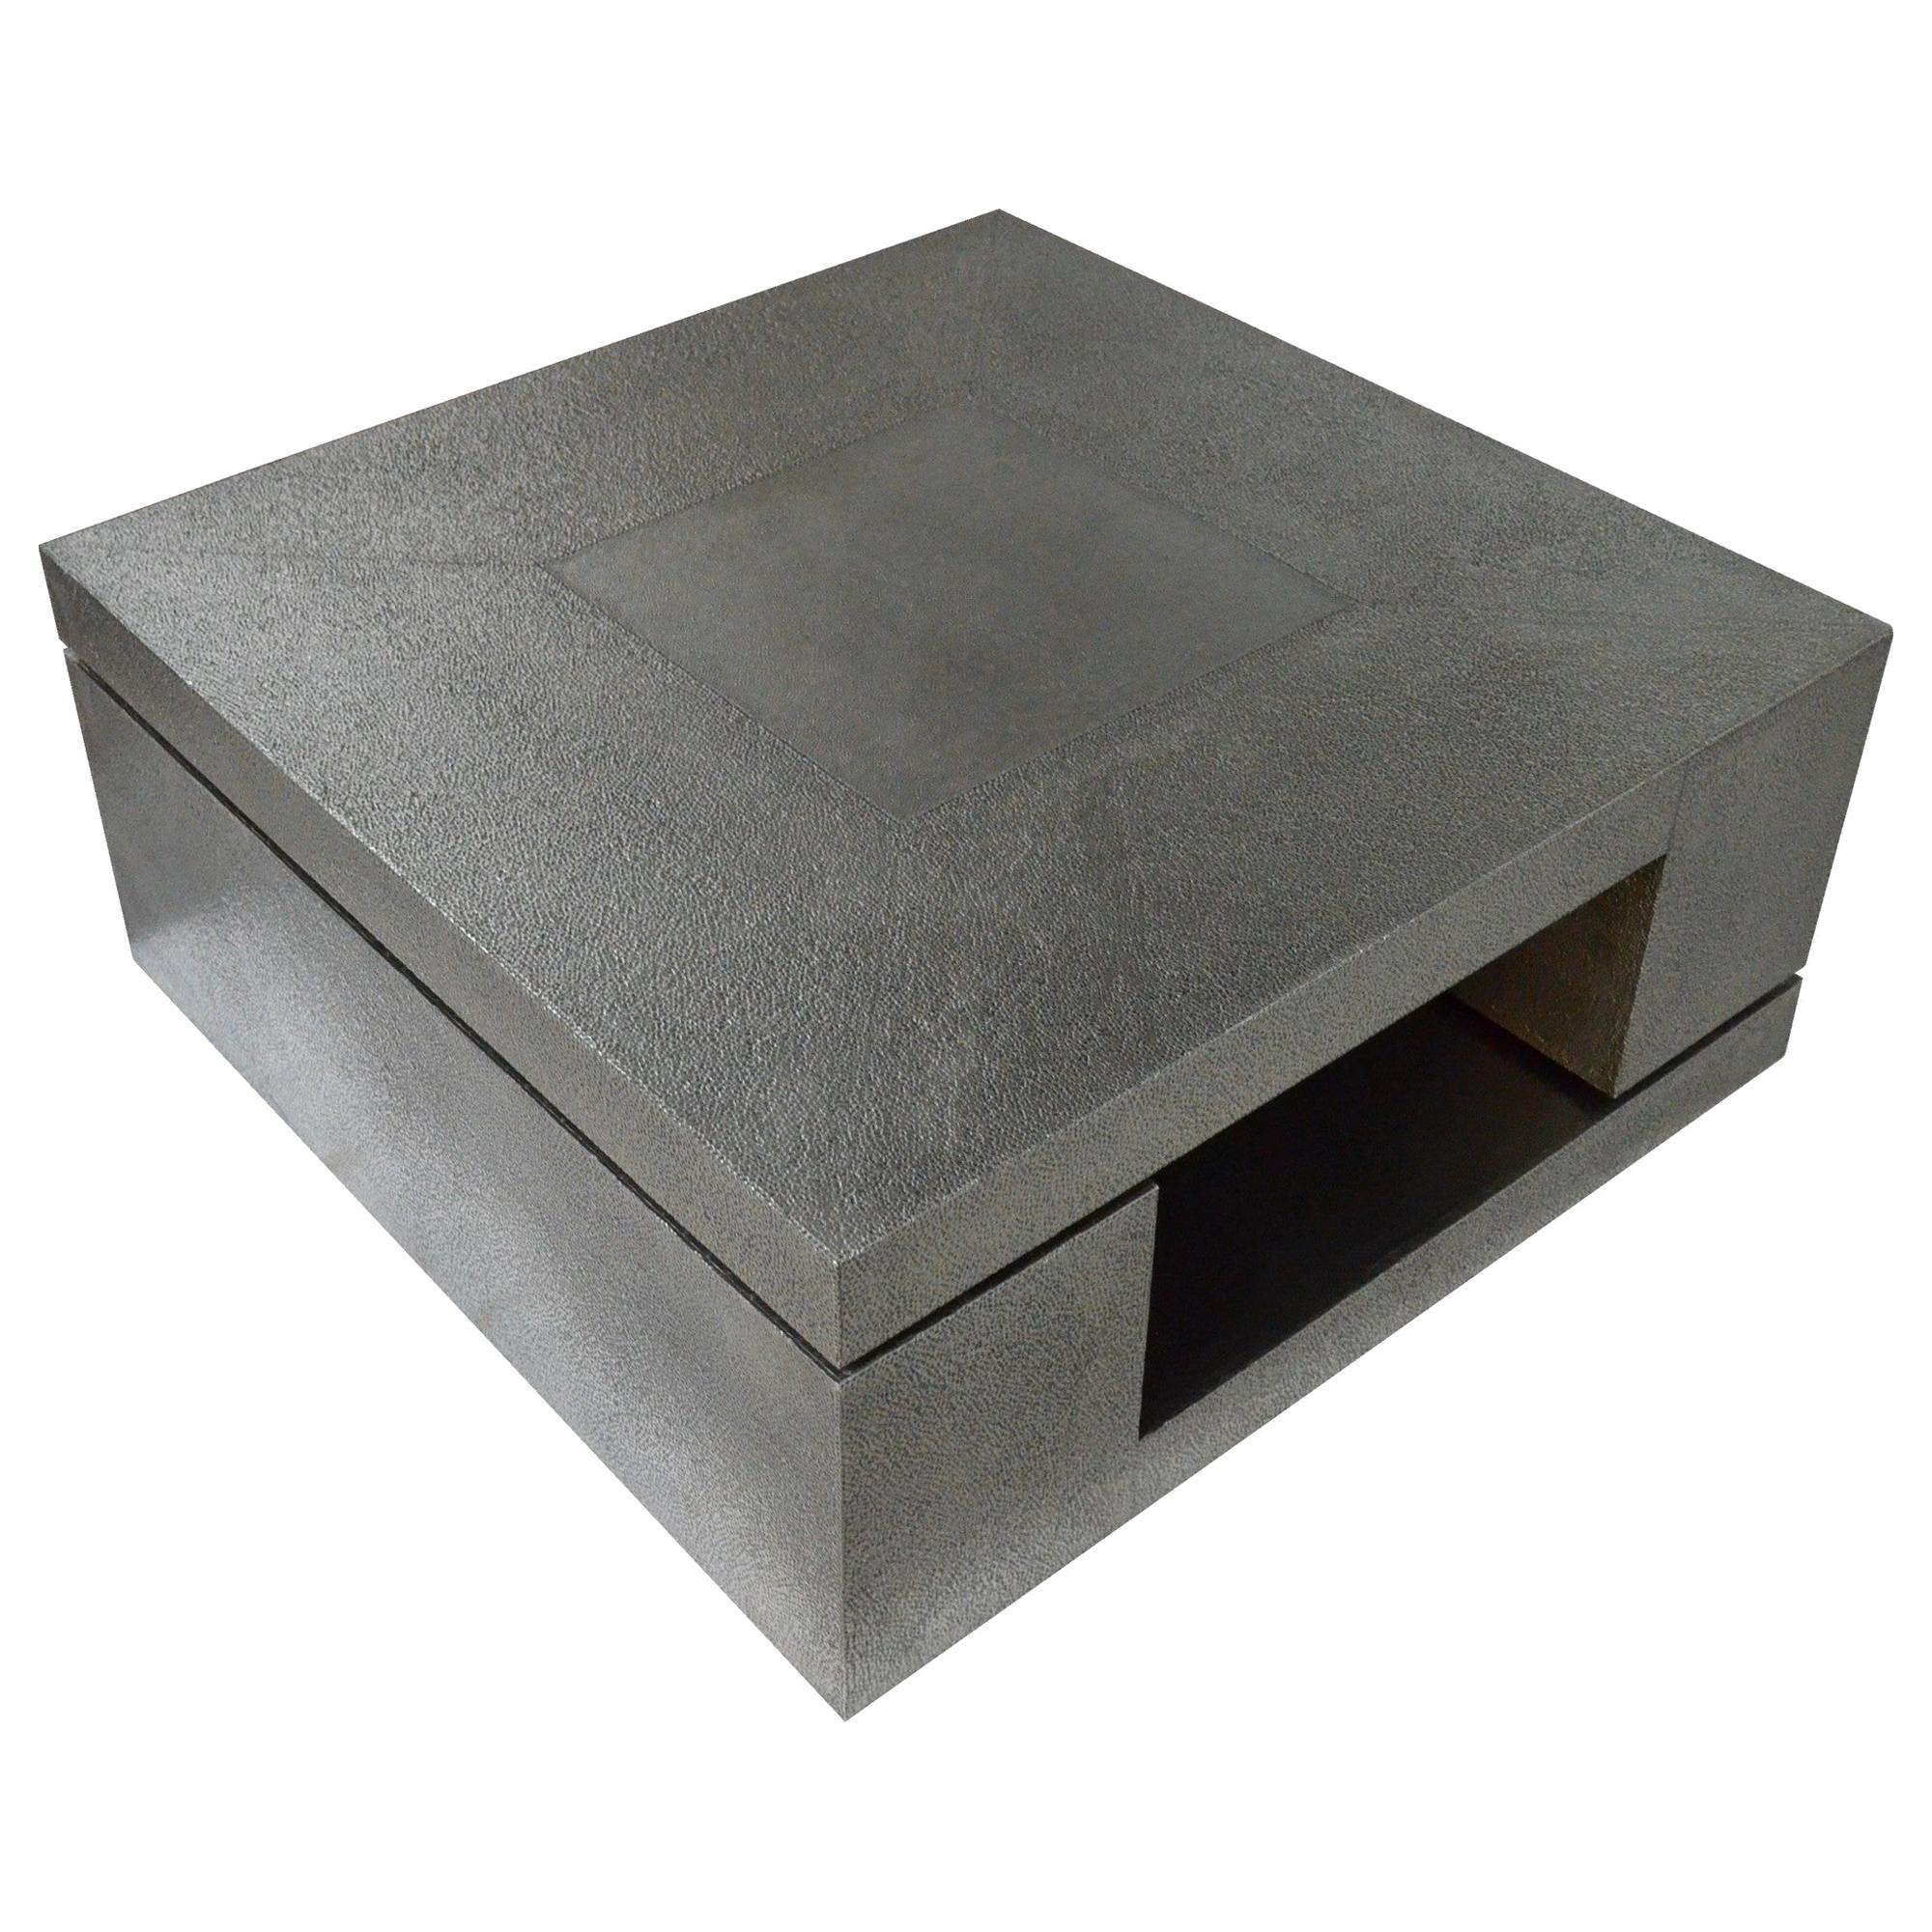 LX2 Table in Antiqued White Bronze Clad Over MDF by Stephanie Odegard